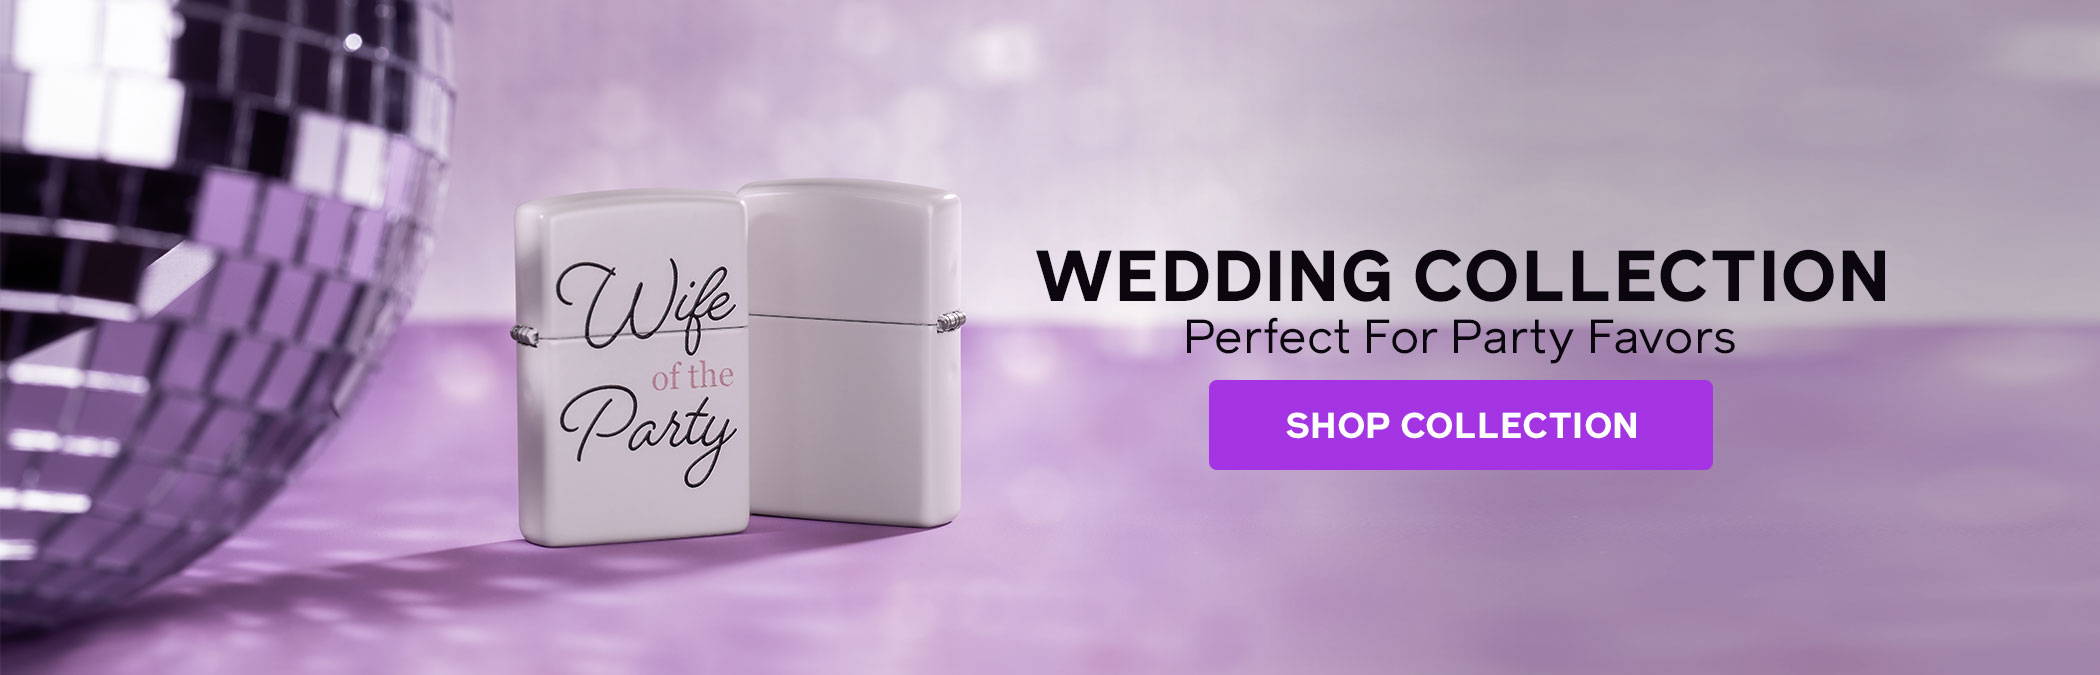 Wedding Collection - Perfect For Party Favors. Shop Collection.